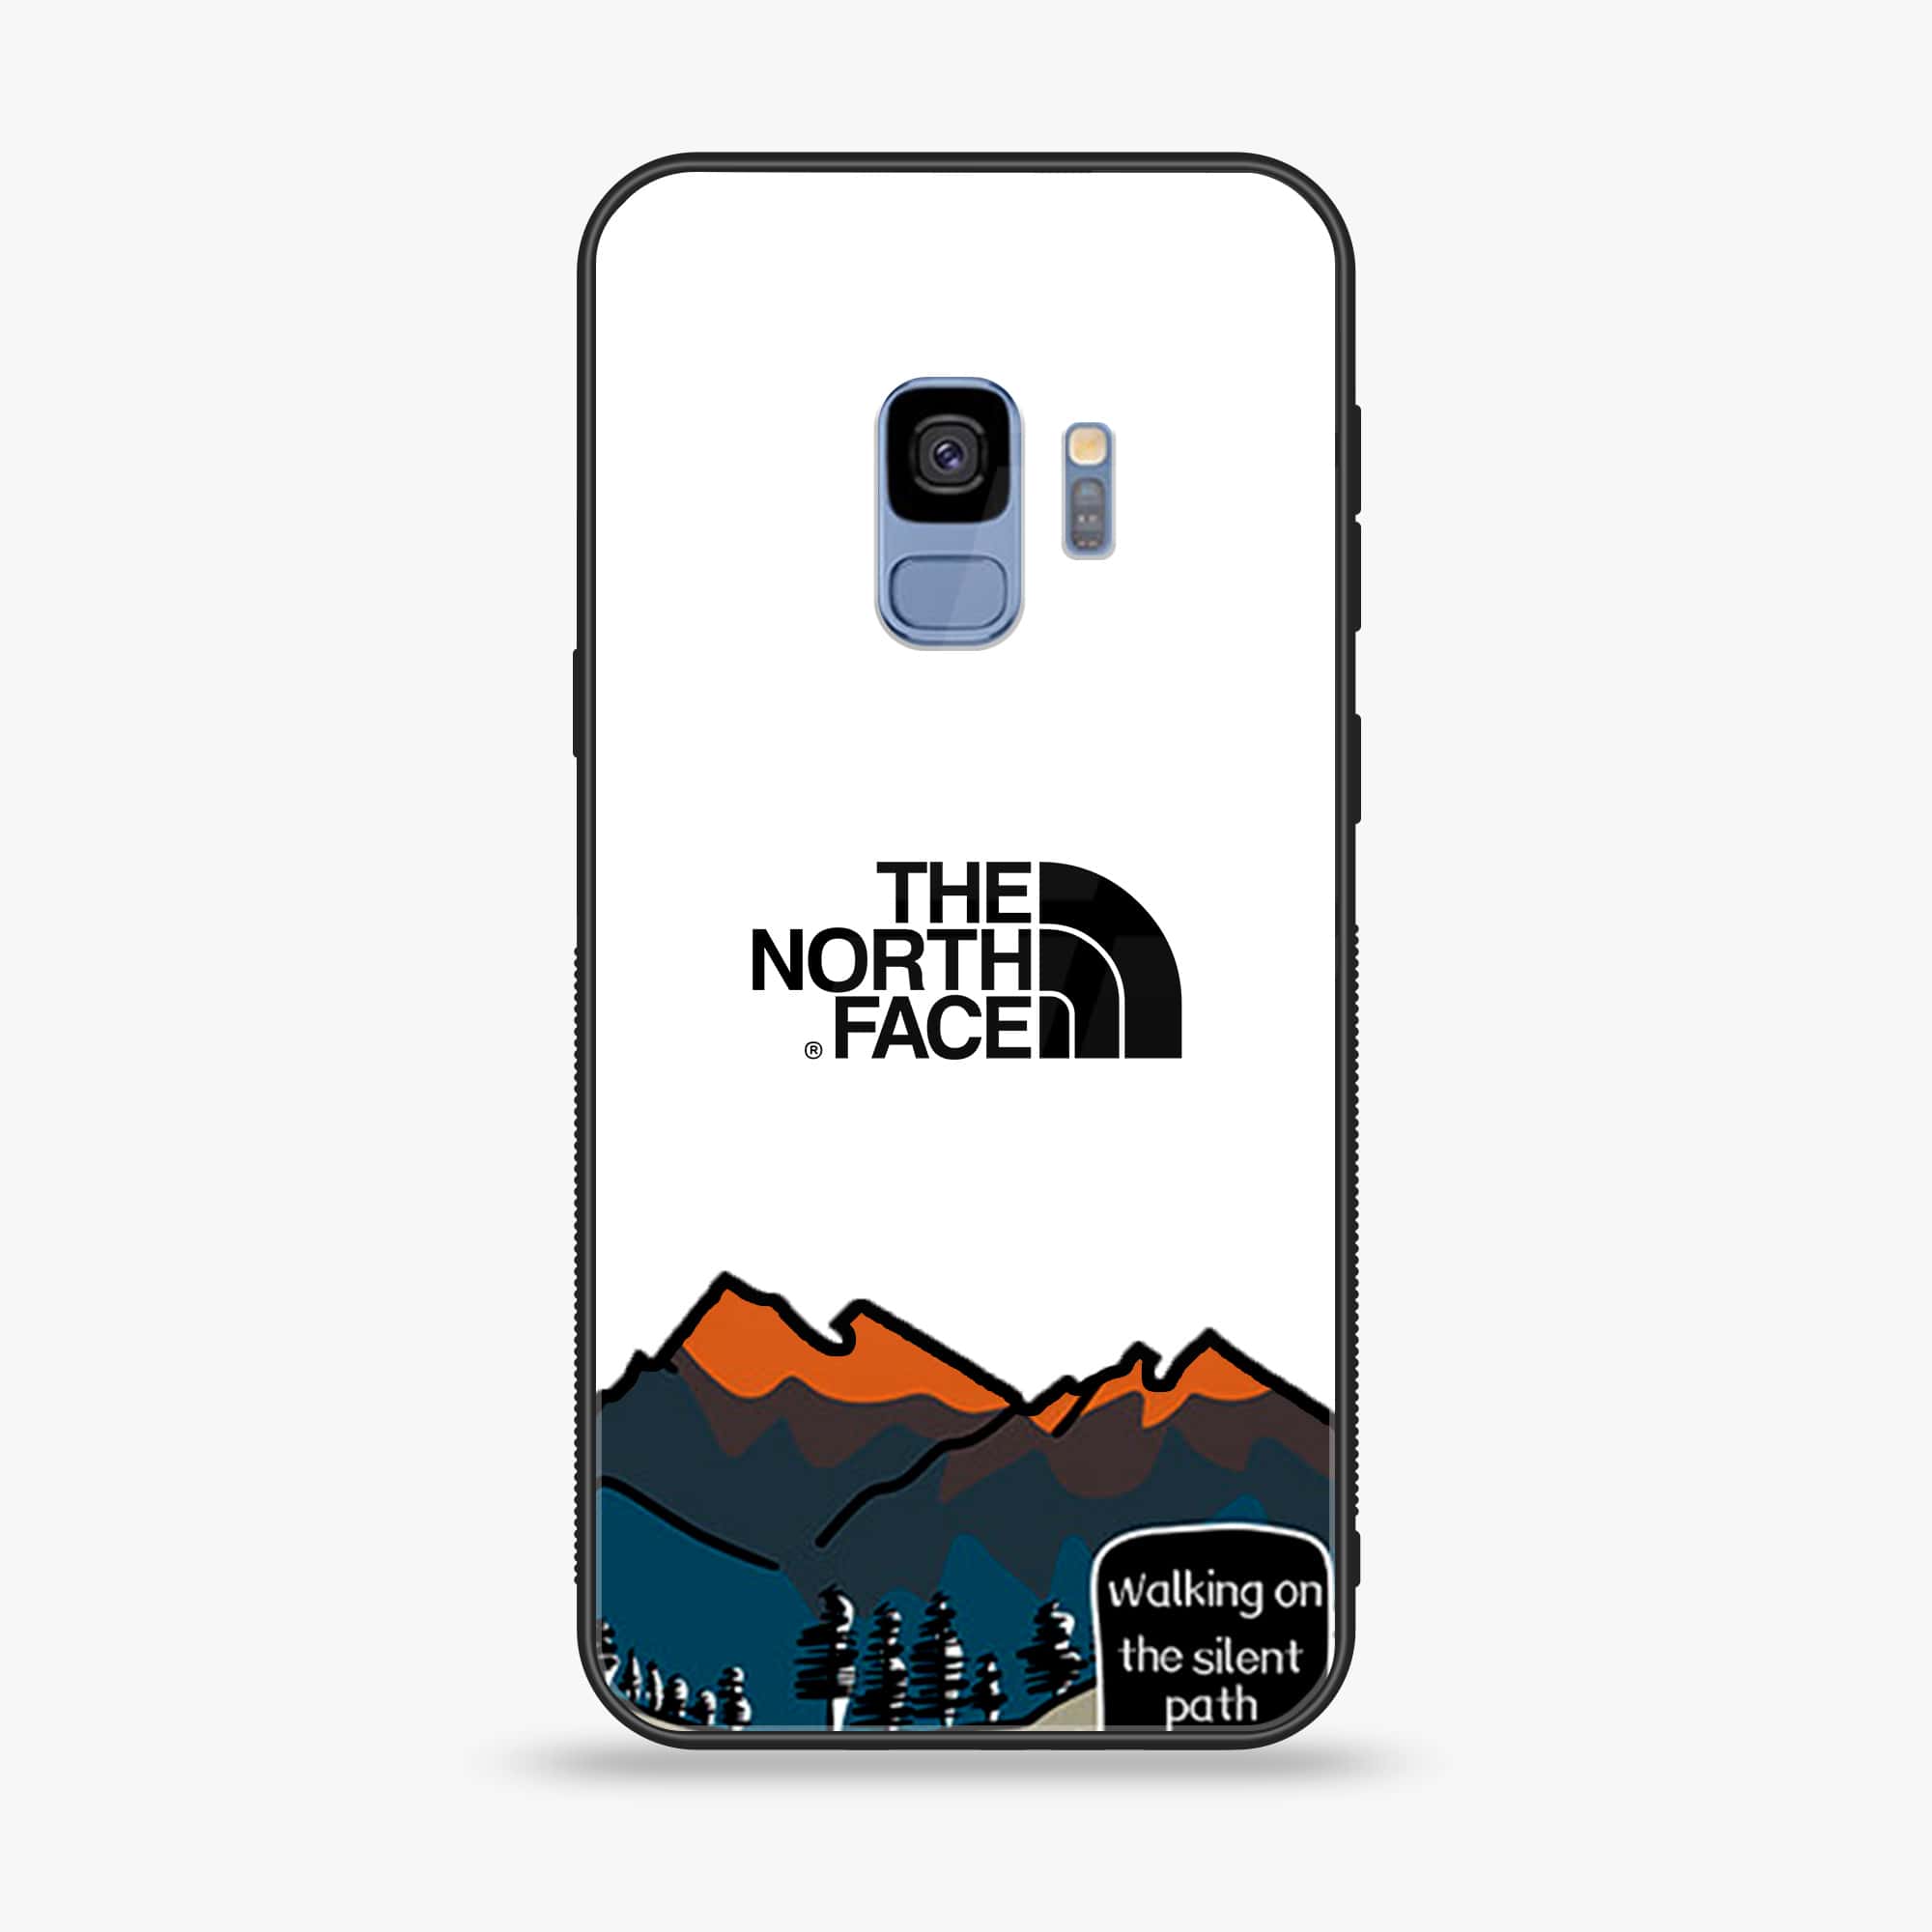 Galaxy S9 - The North Face Series - Premium Printed Glass soft Bumper shock Proof Case